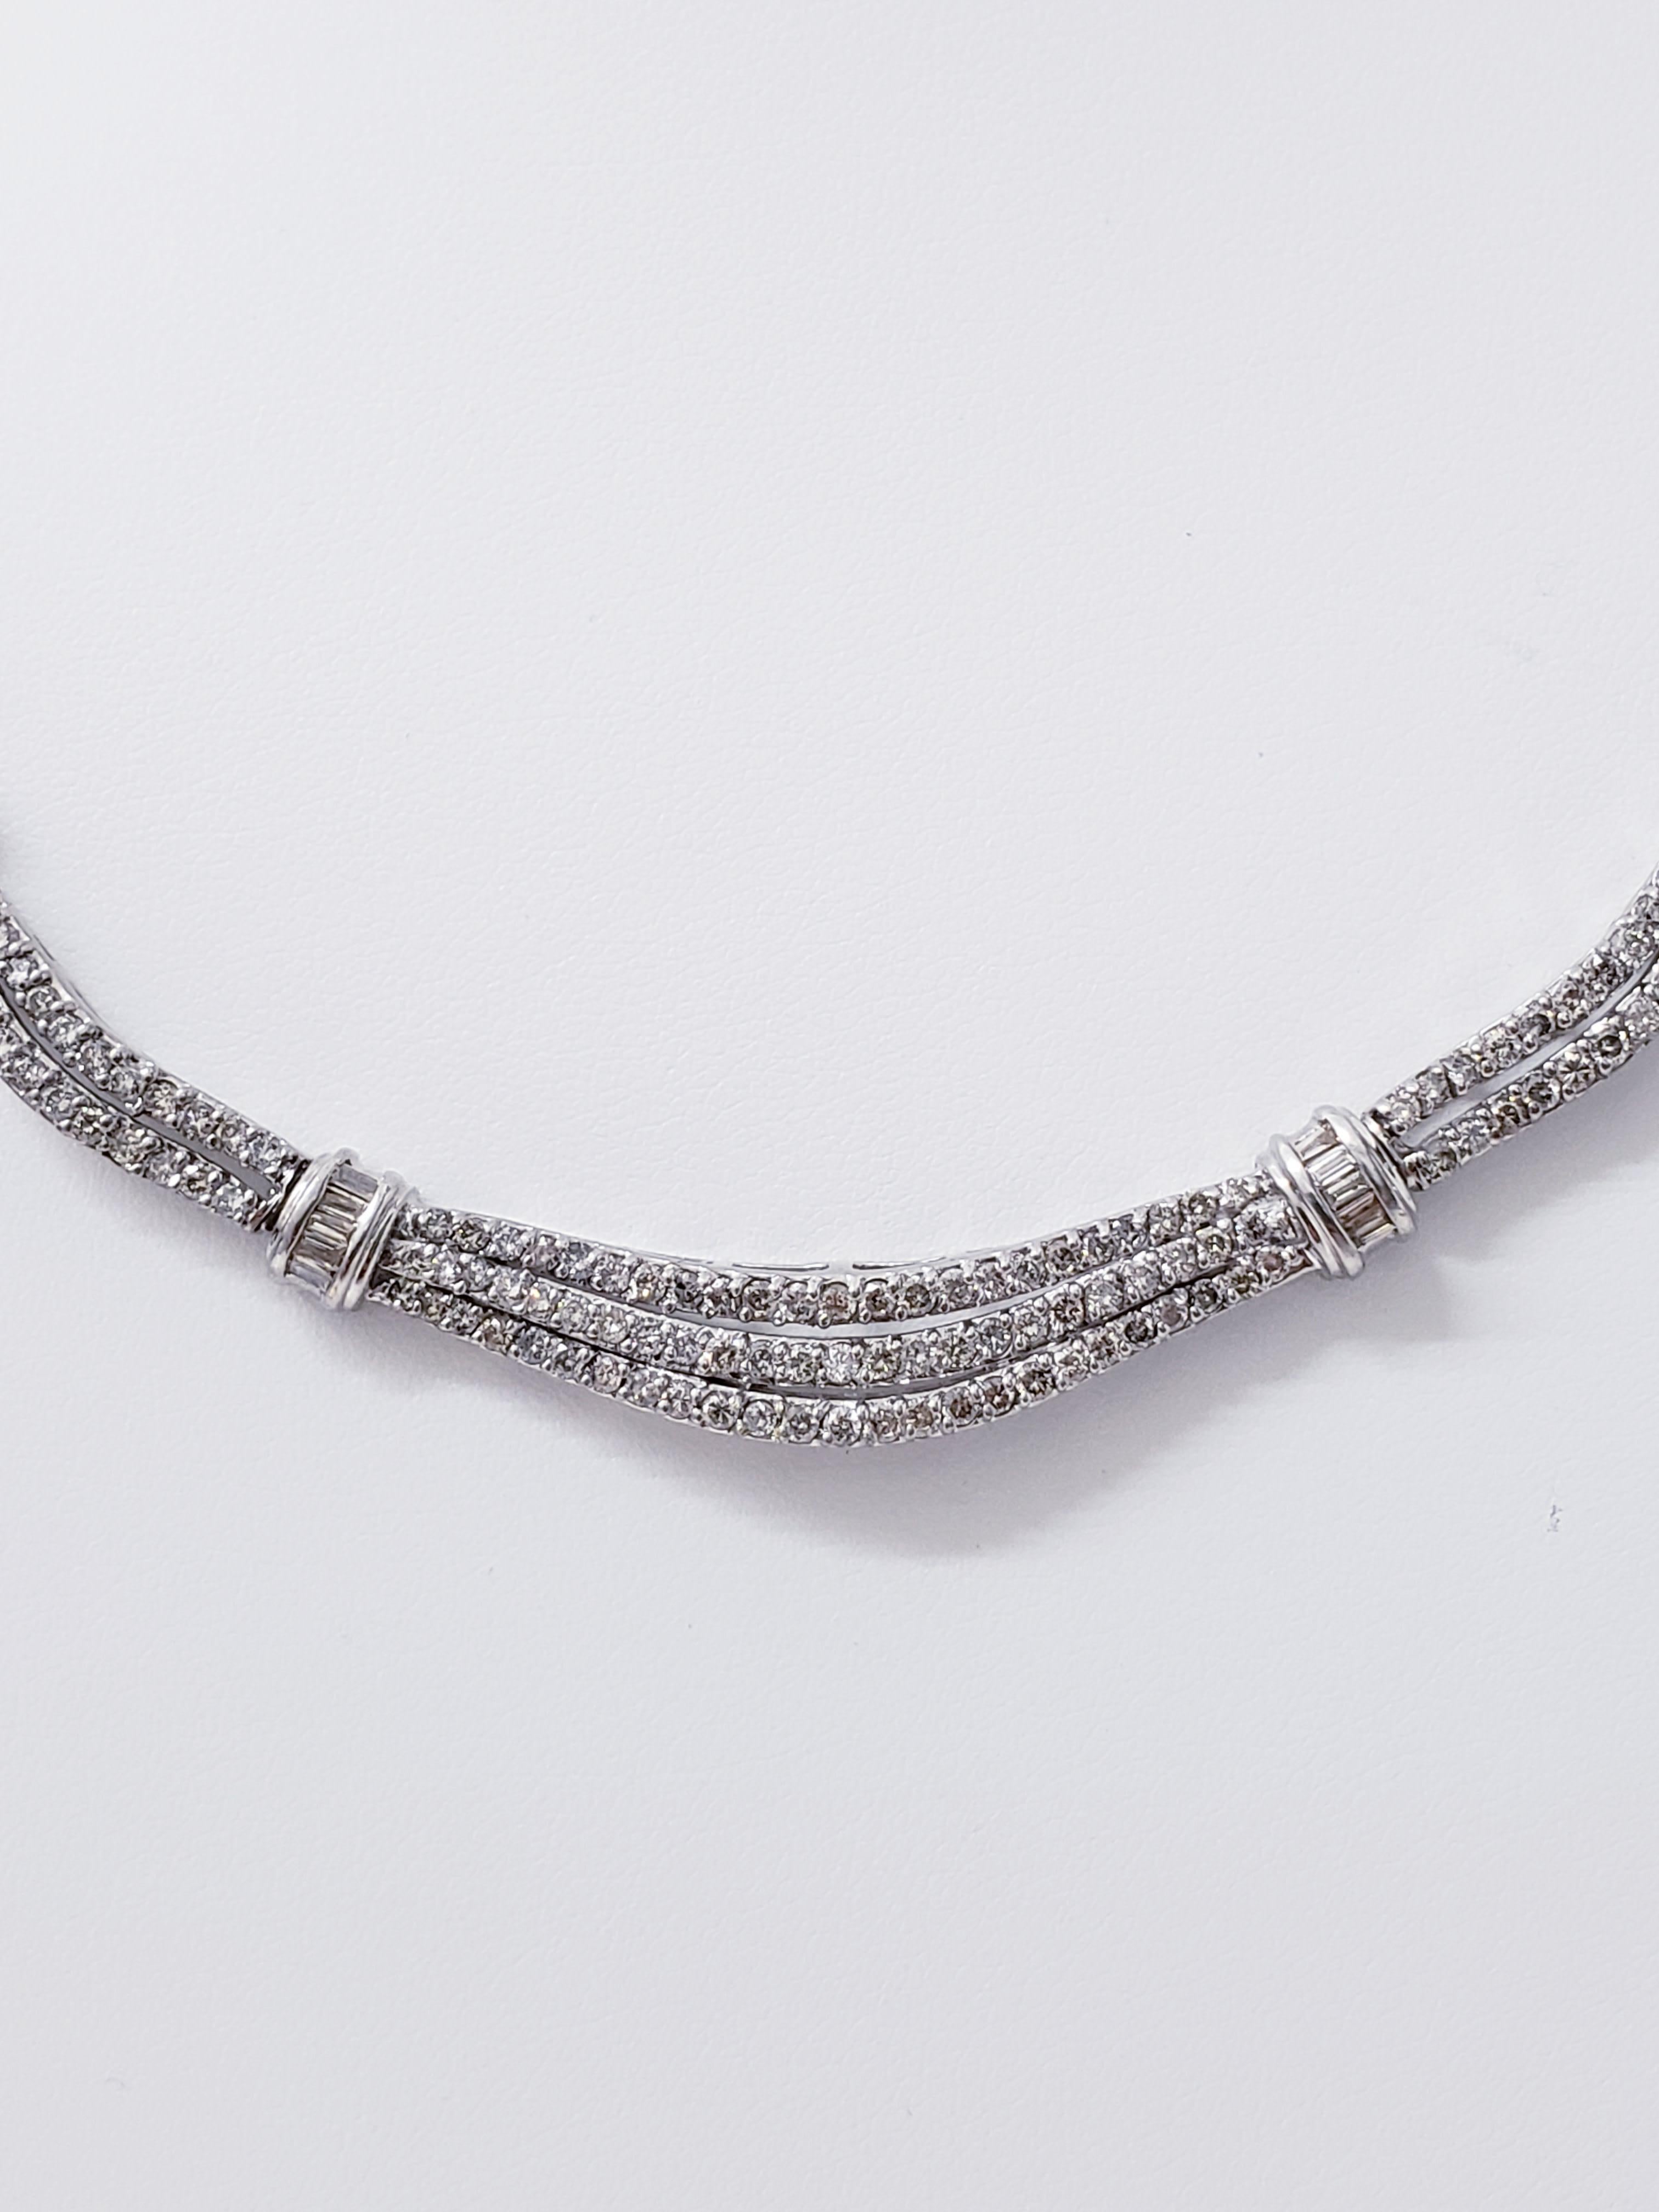 Vintage 12 Total Carats Full Diamonds Necklace Signed ADL in 14k solid white gold. The diamonds feature baguette and round diamonds approx 12 carats total weight. The length of the necklace is 18 inches long and weights 26.3 grams 14k solid gold.